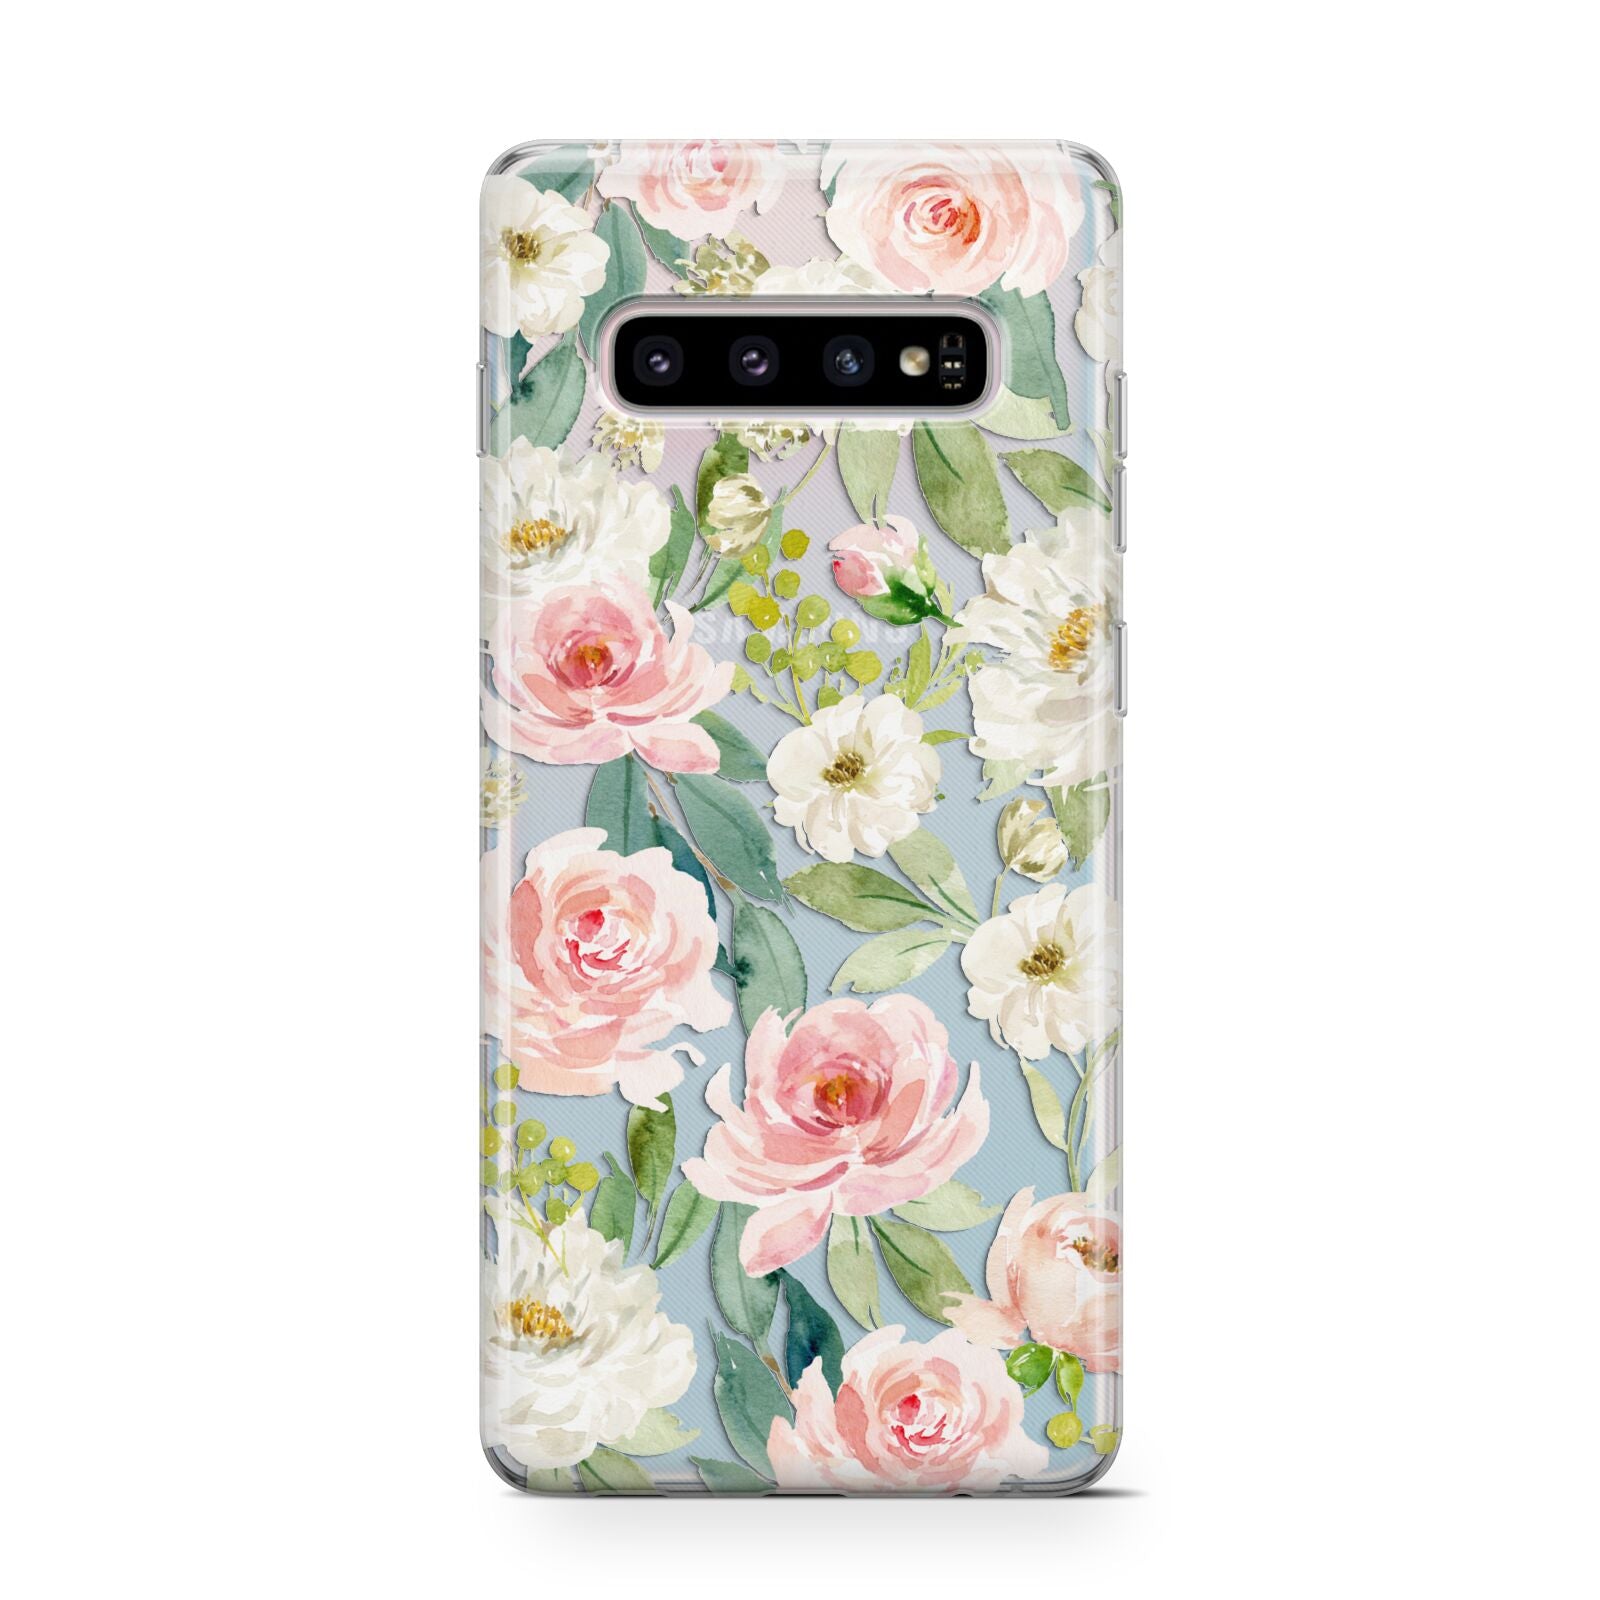 Watercolour Peonies Roses and Foliage Samsung Galaxy S10 Case